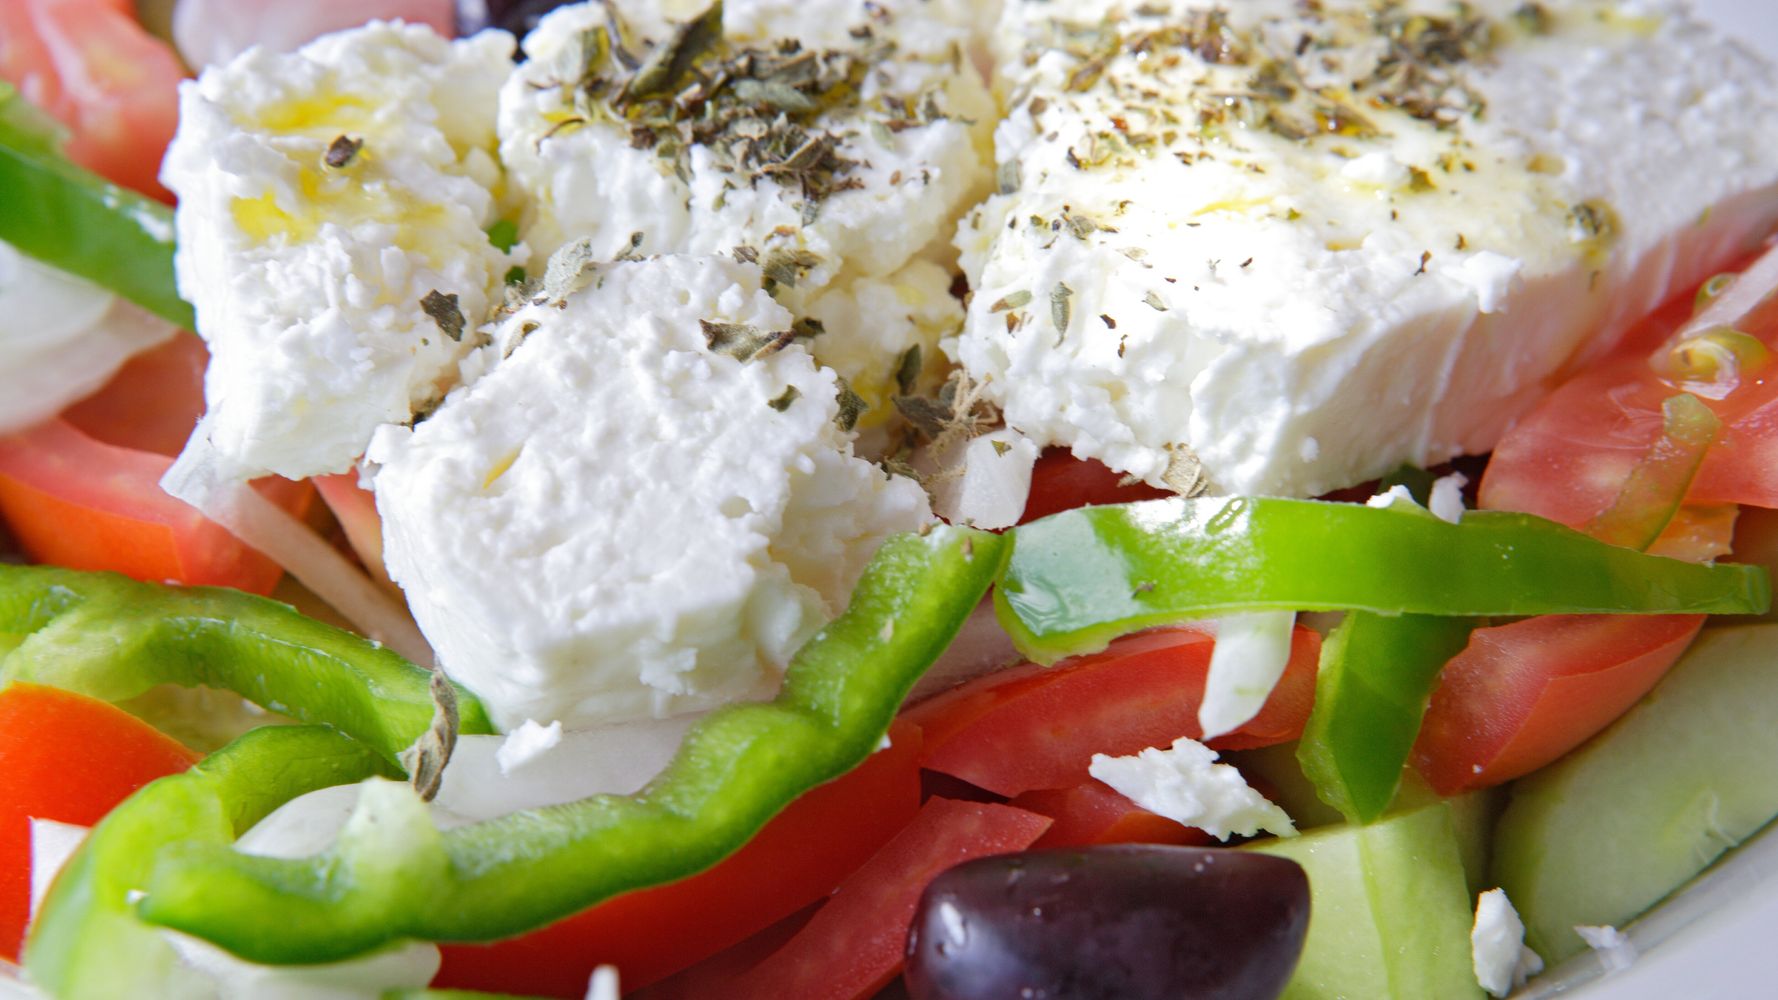 There Are 3 Different Types Of Feta Cheese. Here's How To Use Each Of Them.